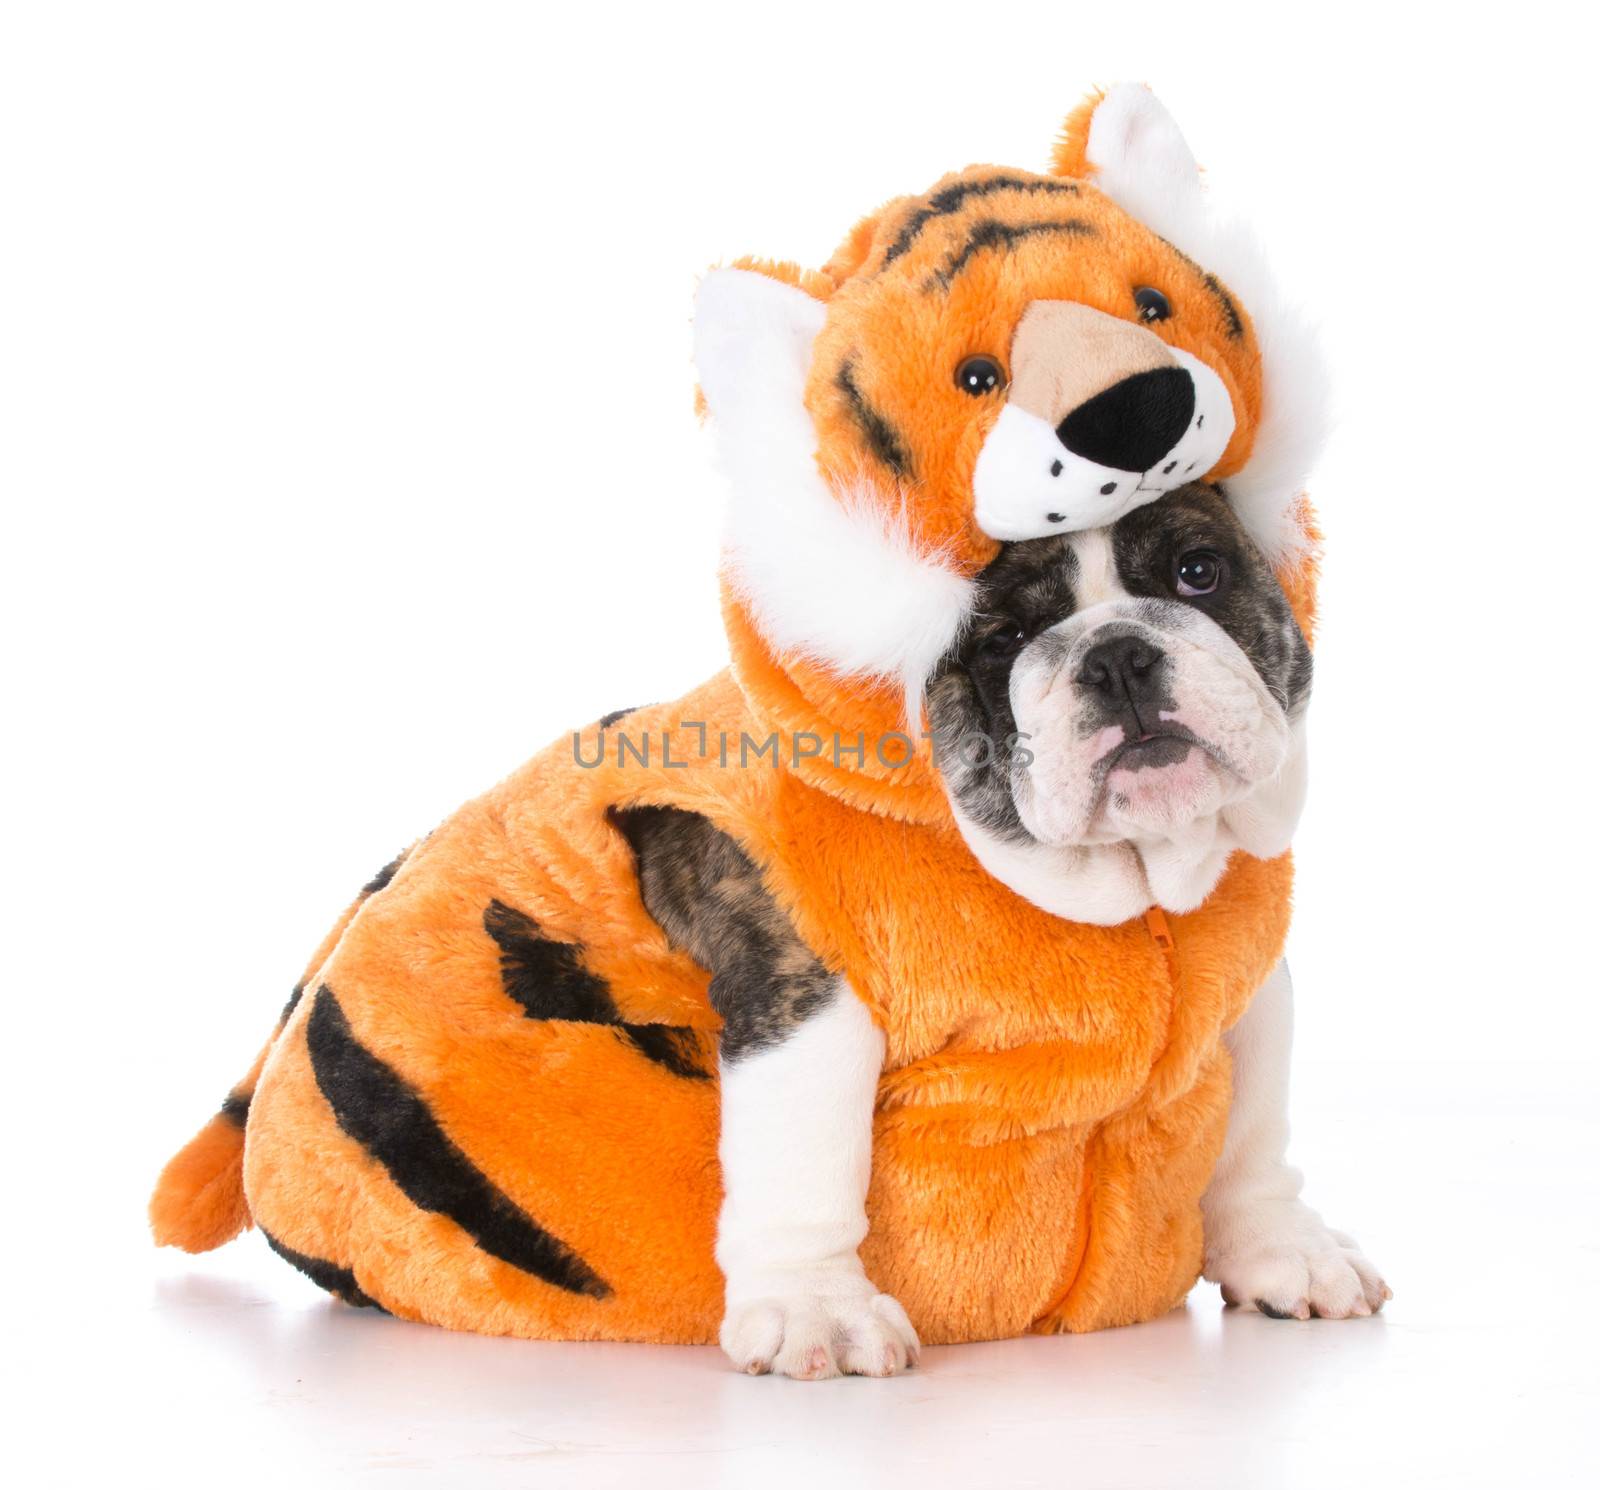 dog wearing tiger costume by willeecole123